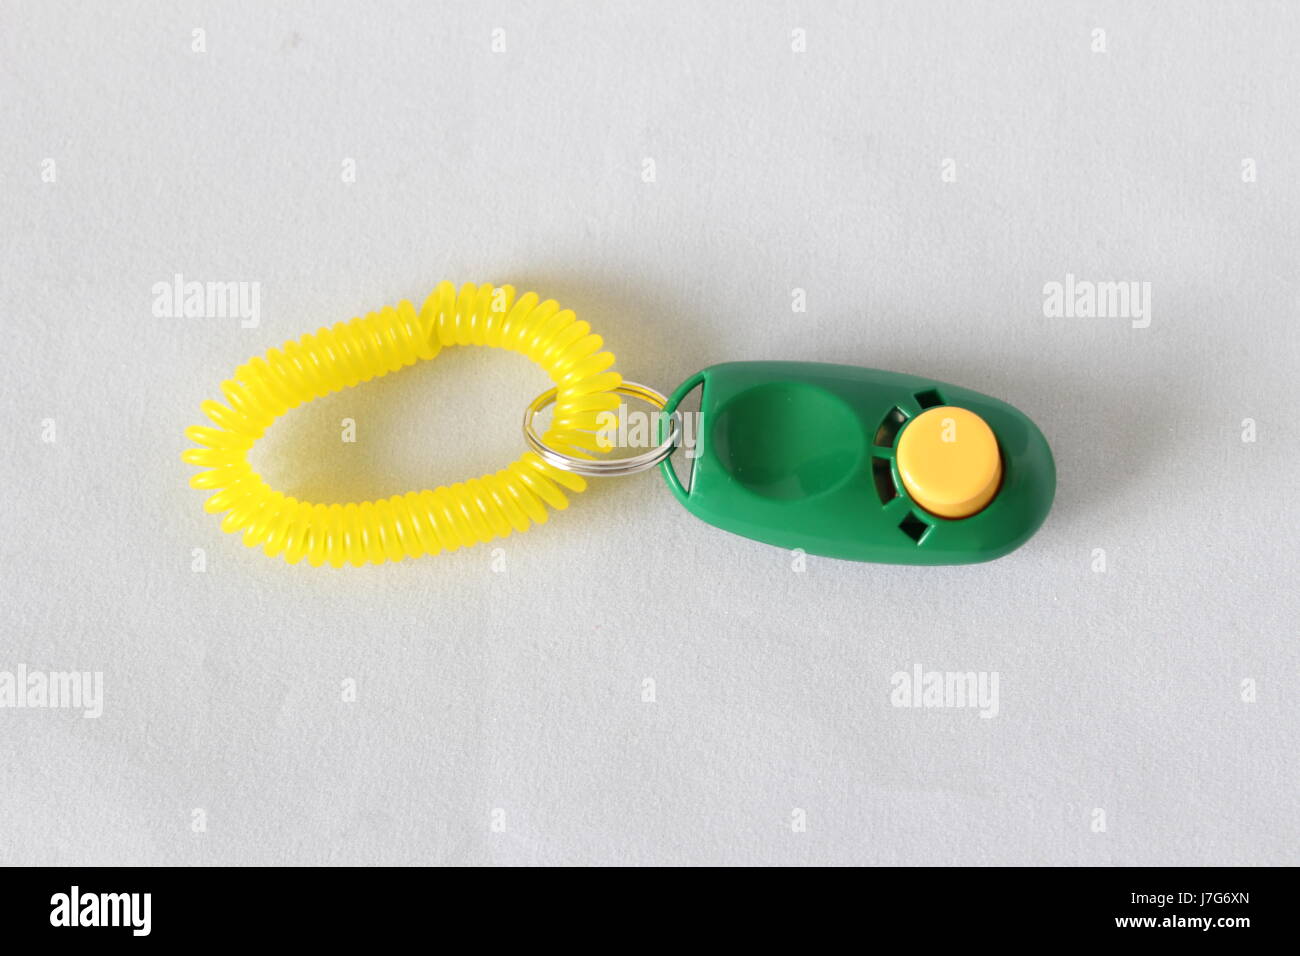 Clicker High Resolution Stock Photography and Images - Alamy